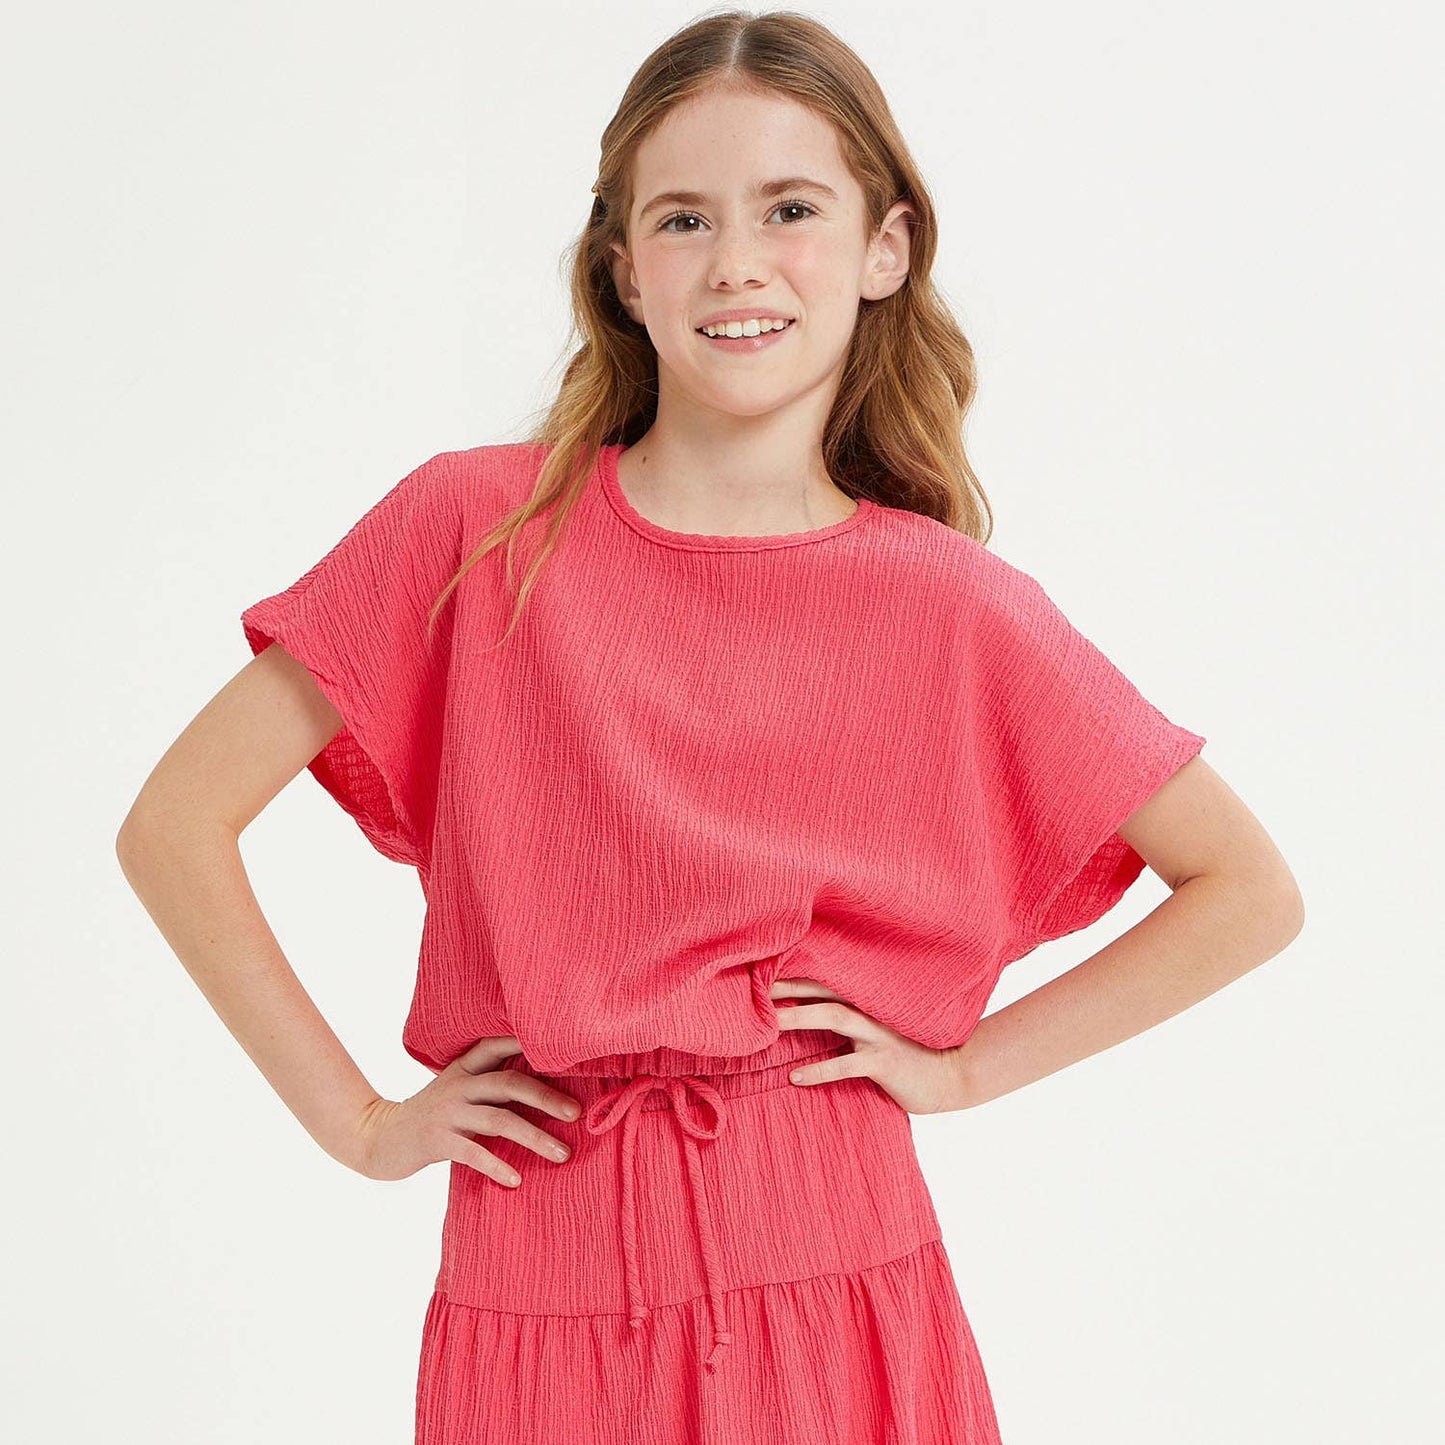 The Addison Top in Hot Pink